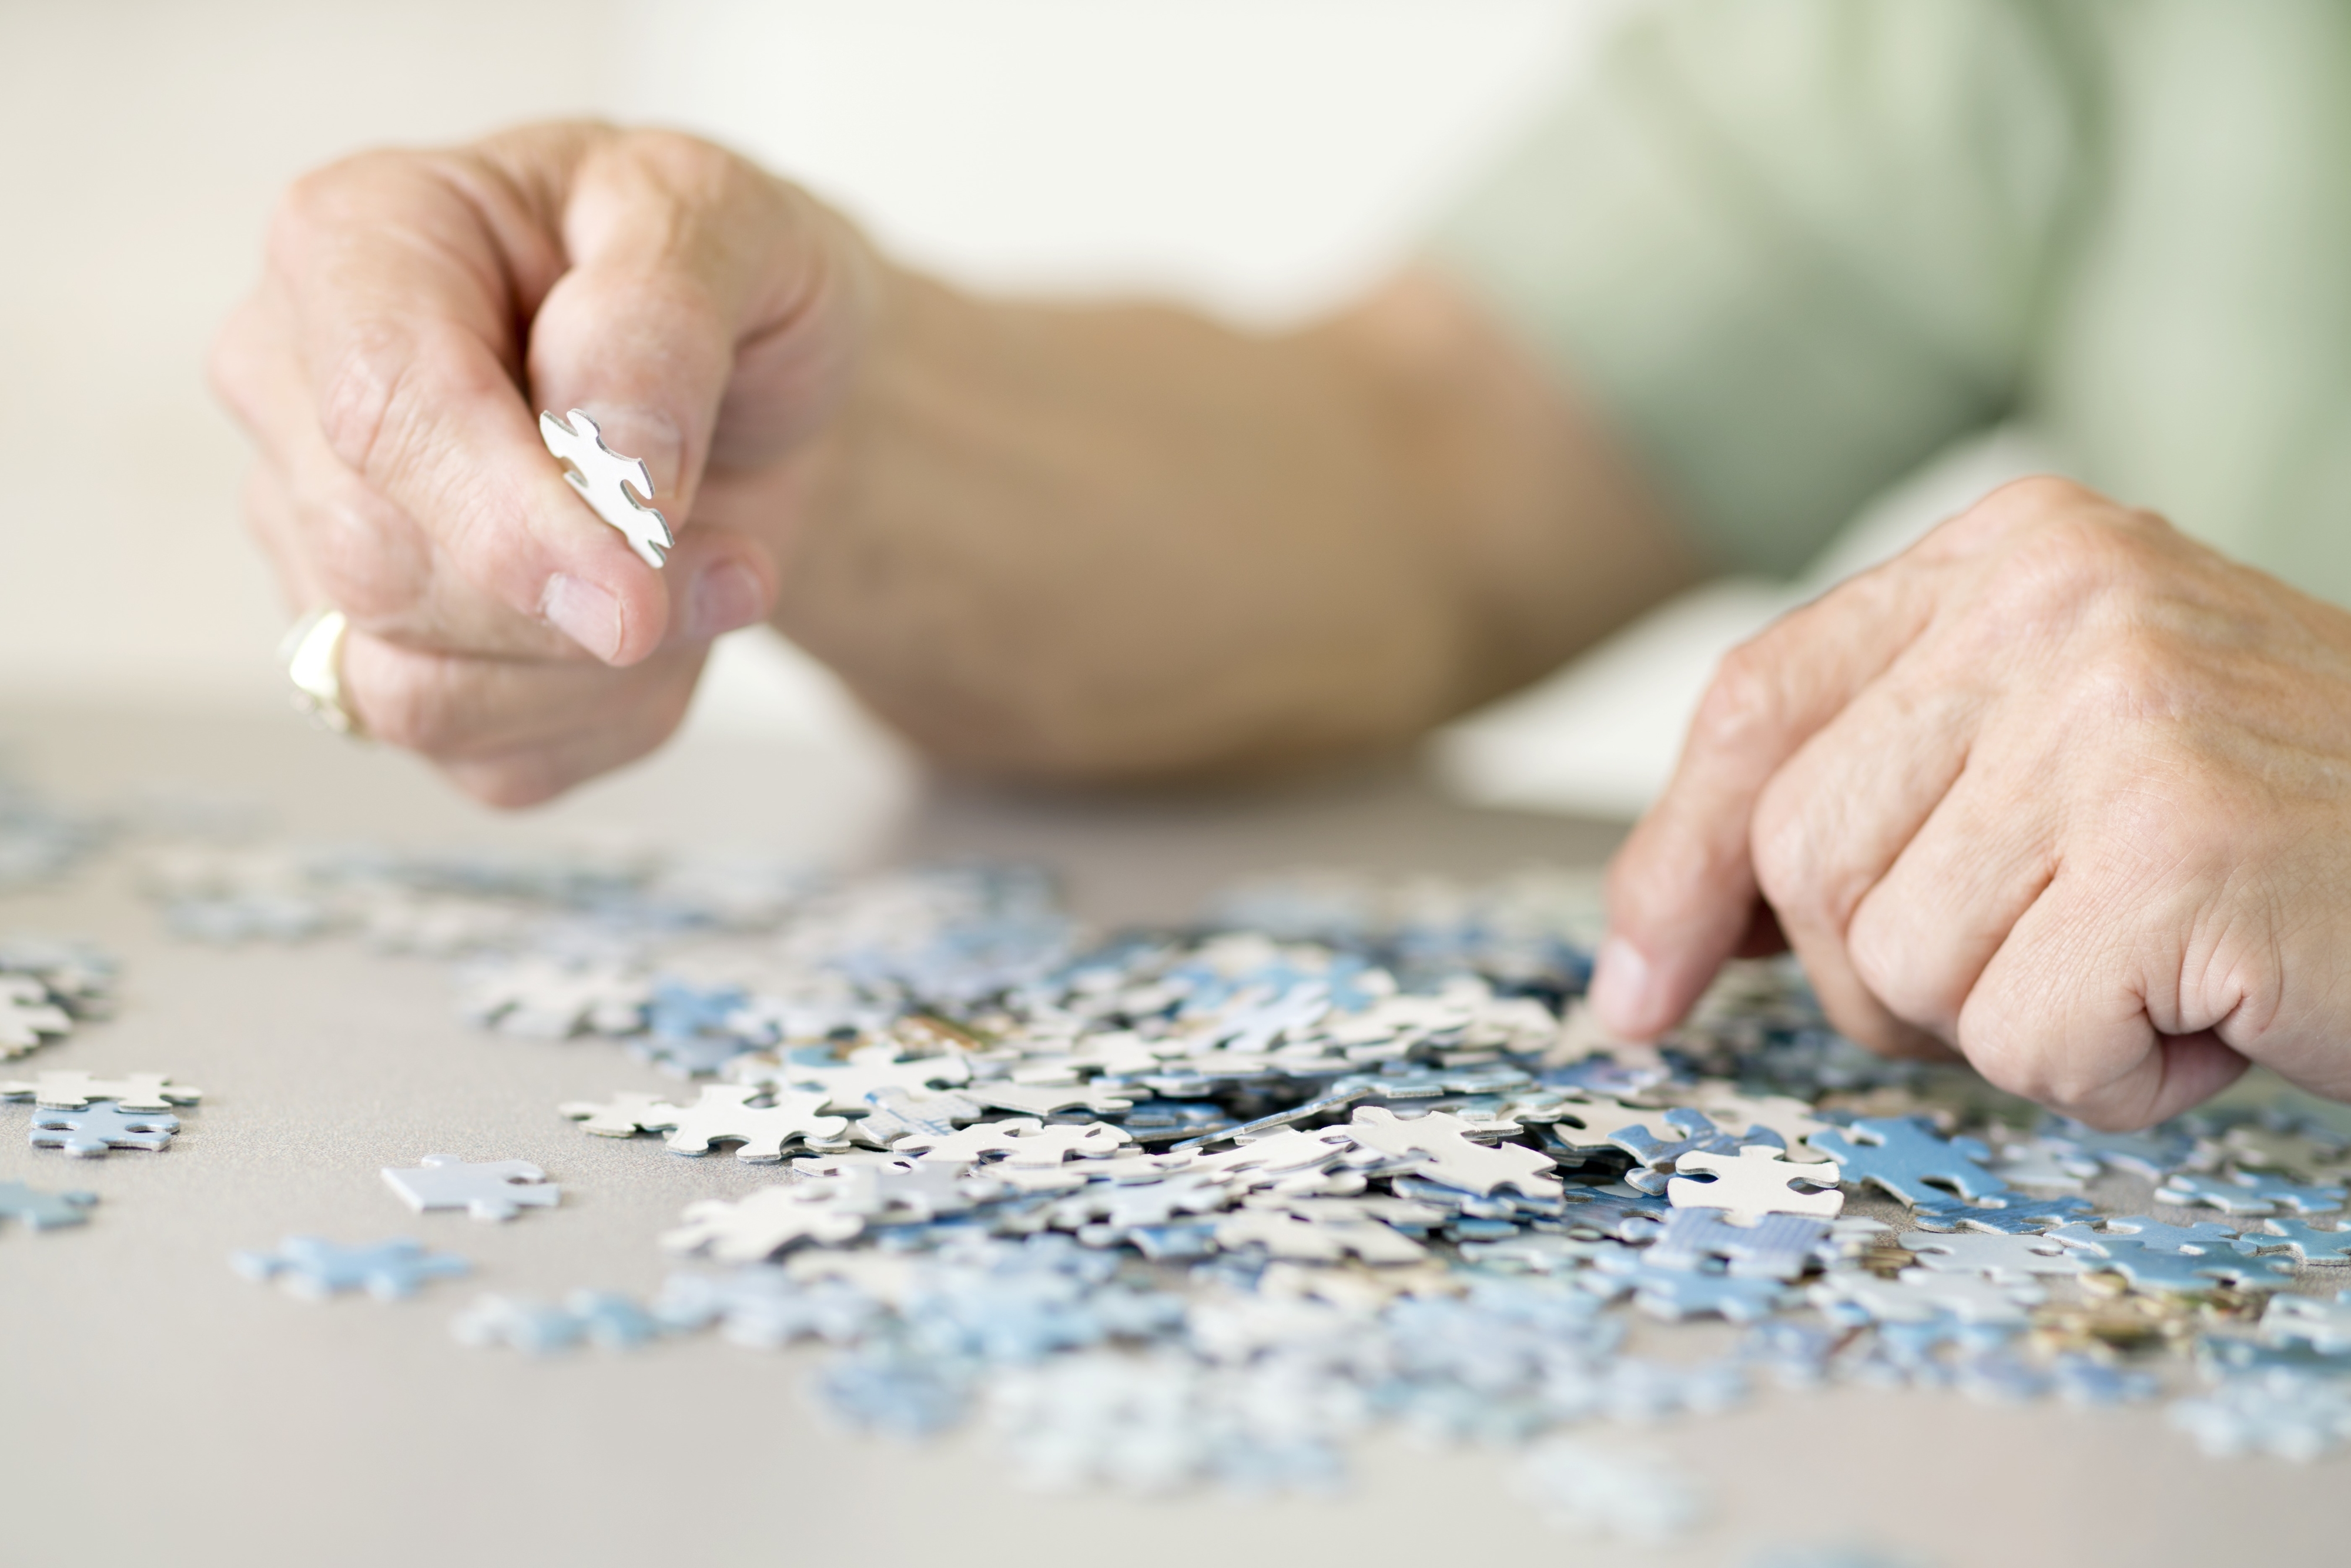 An adult works on solving a jigsaw puzzle